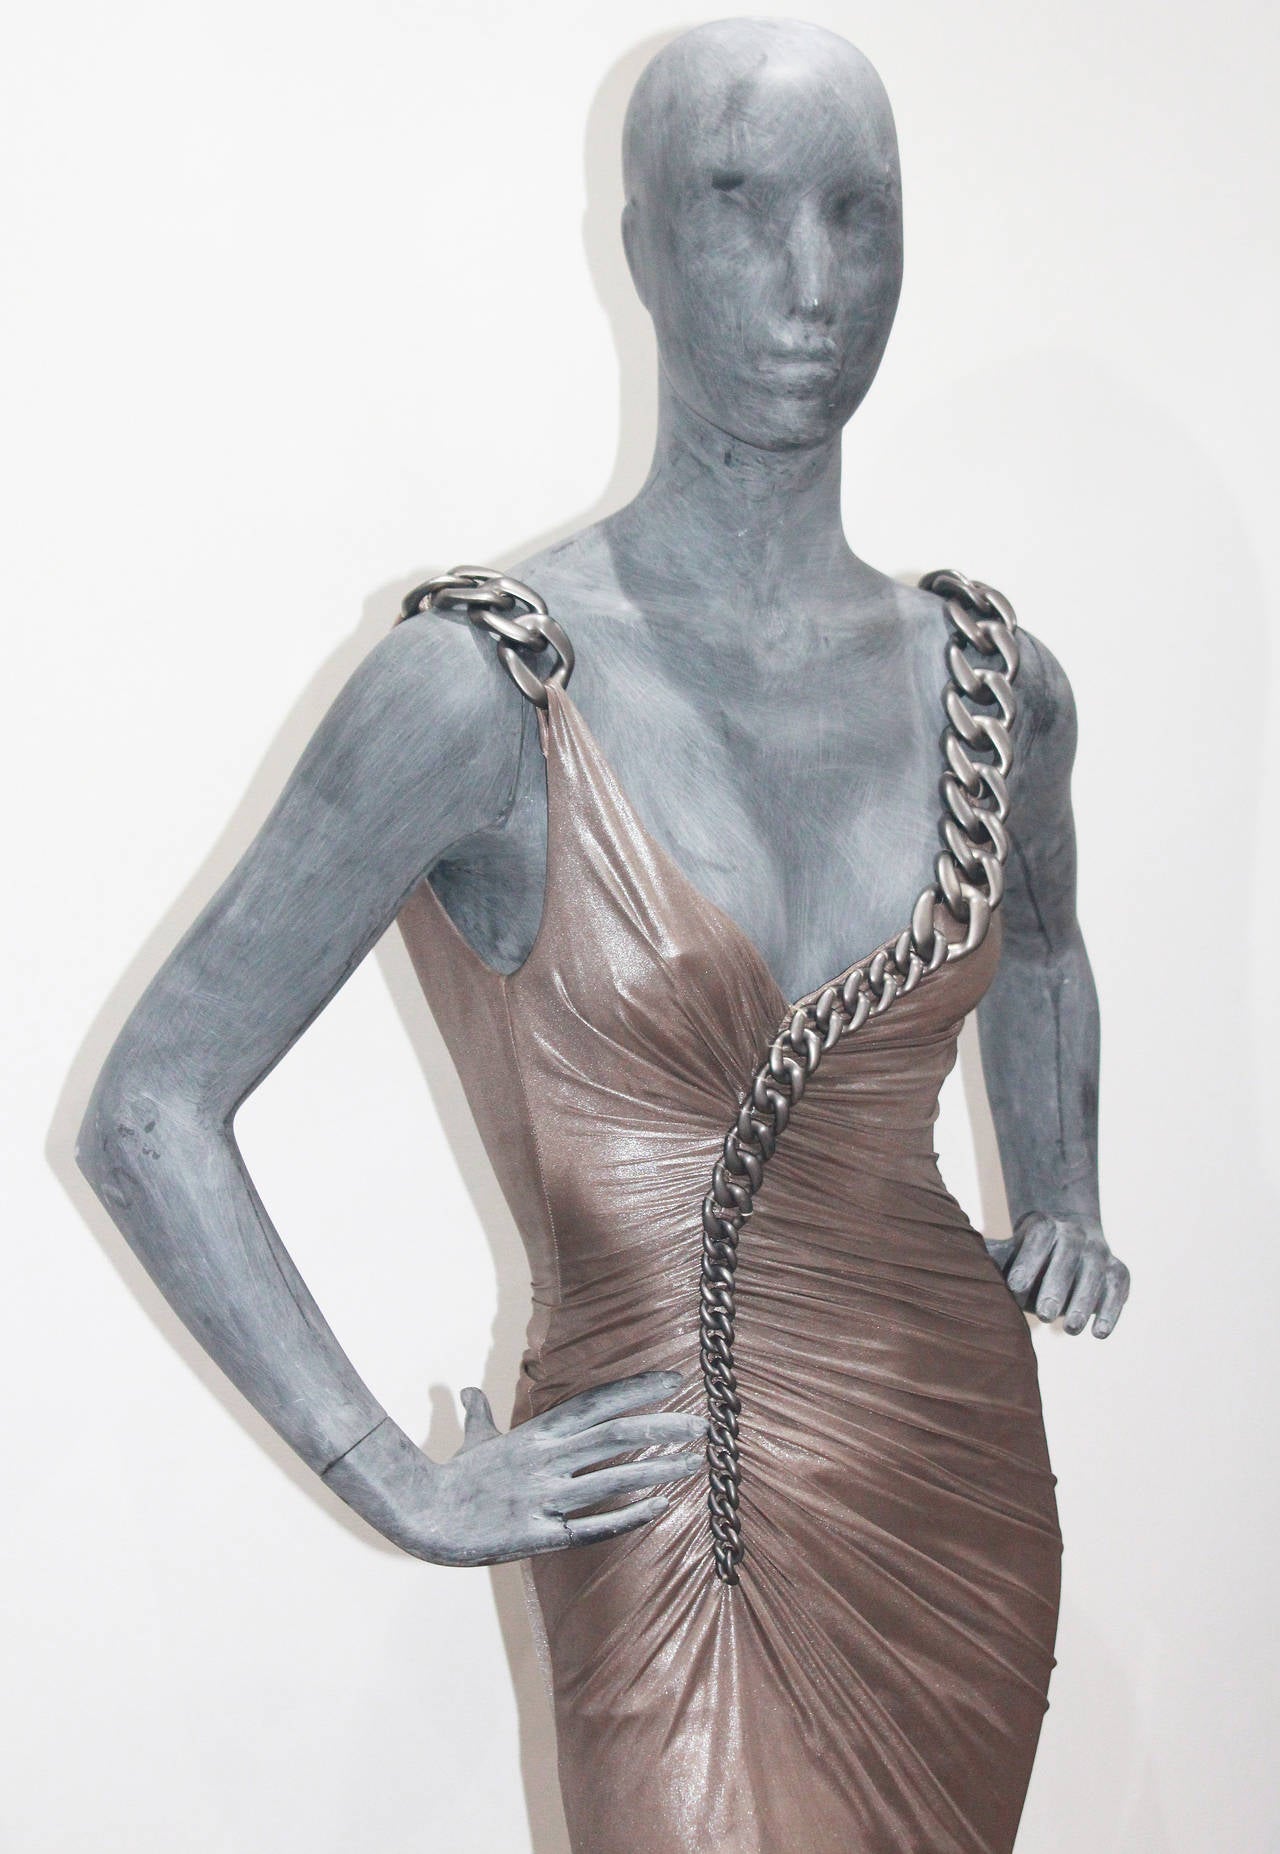 A beautiful Versace chain dress from the Autumn/Winter 2007. The dress is in a taupe metallic colour and is held up by a chain which wraps around the body. The exact dress in a different colour was worn by actress Jessica Alba for Fashion Rocks